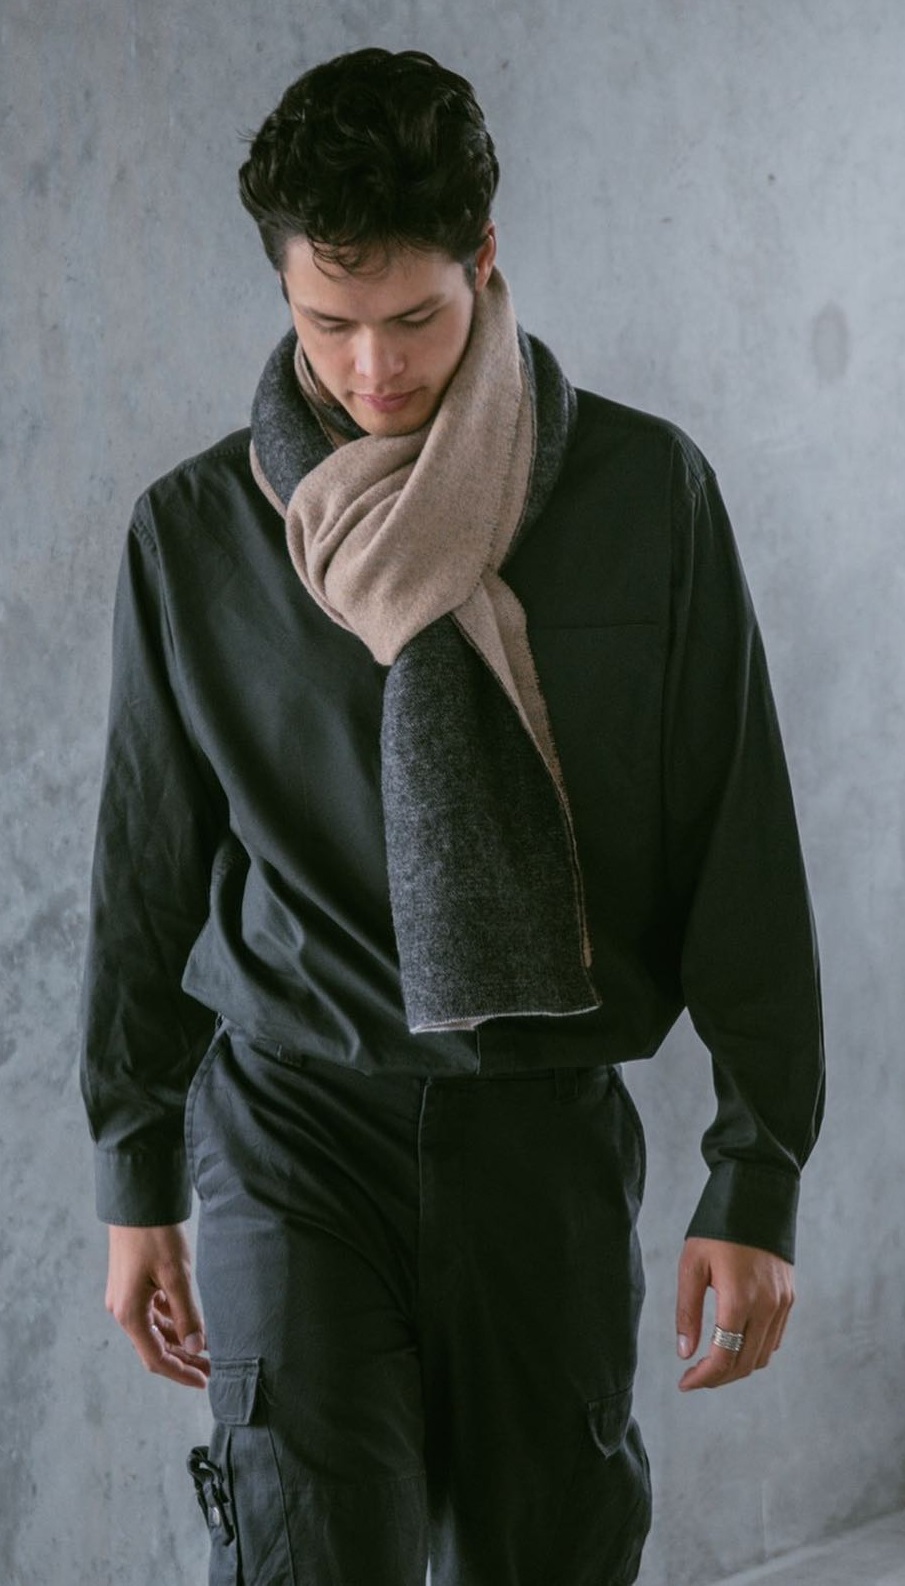 Scarf Layered over a turtle neck